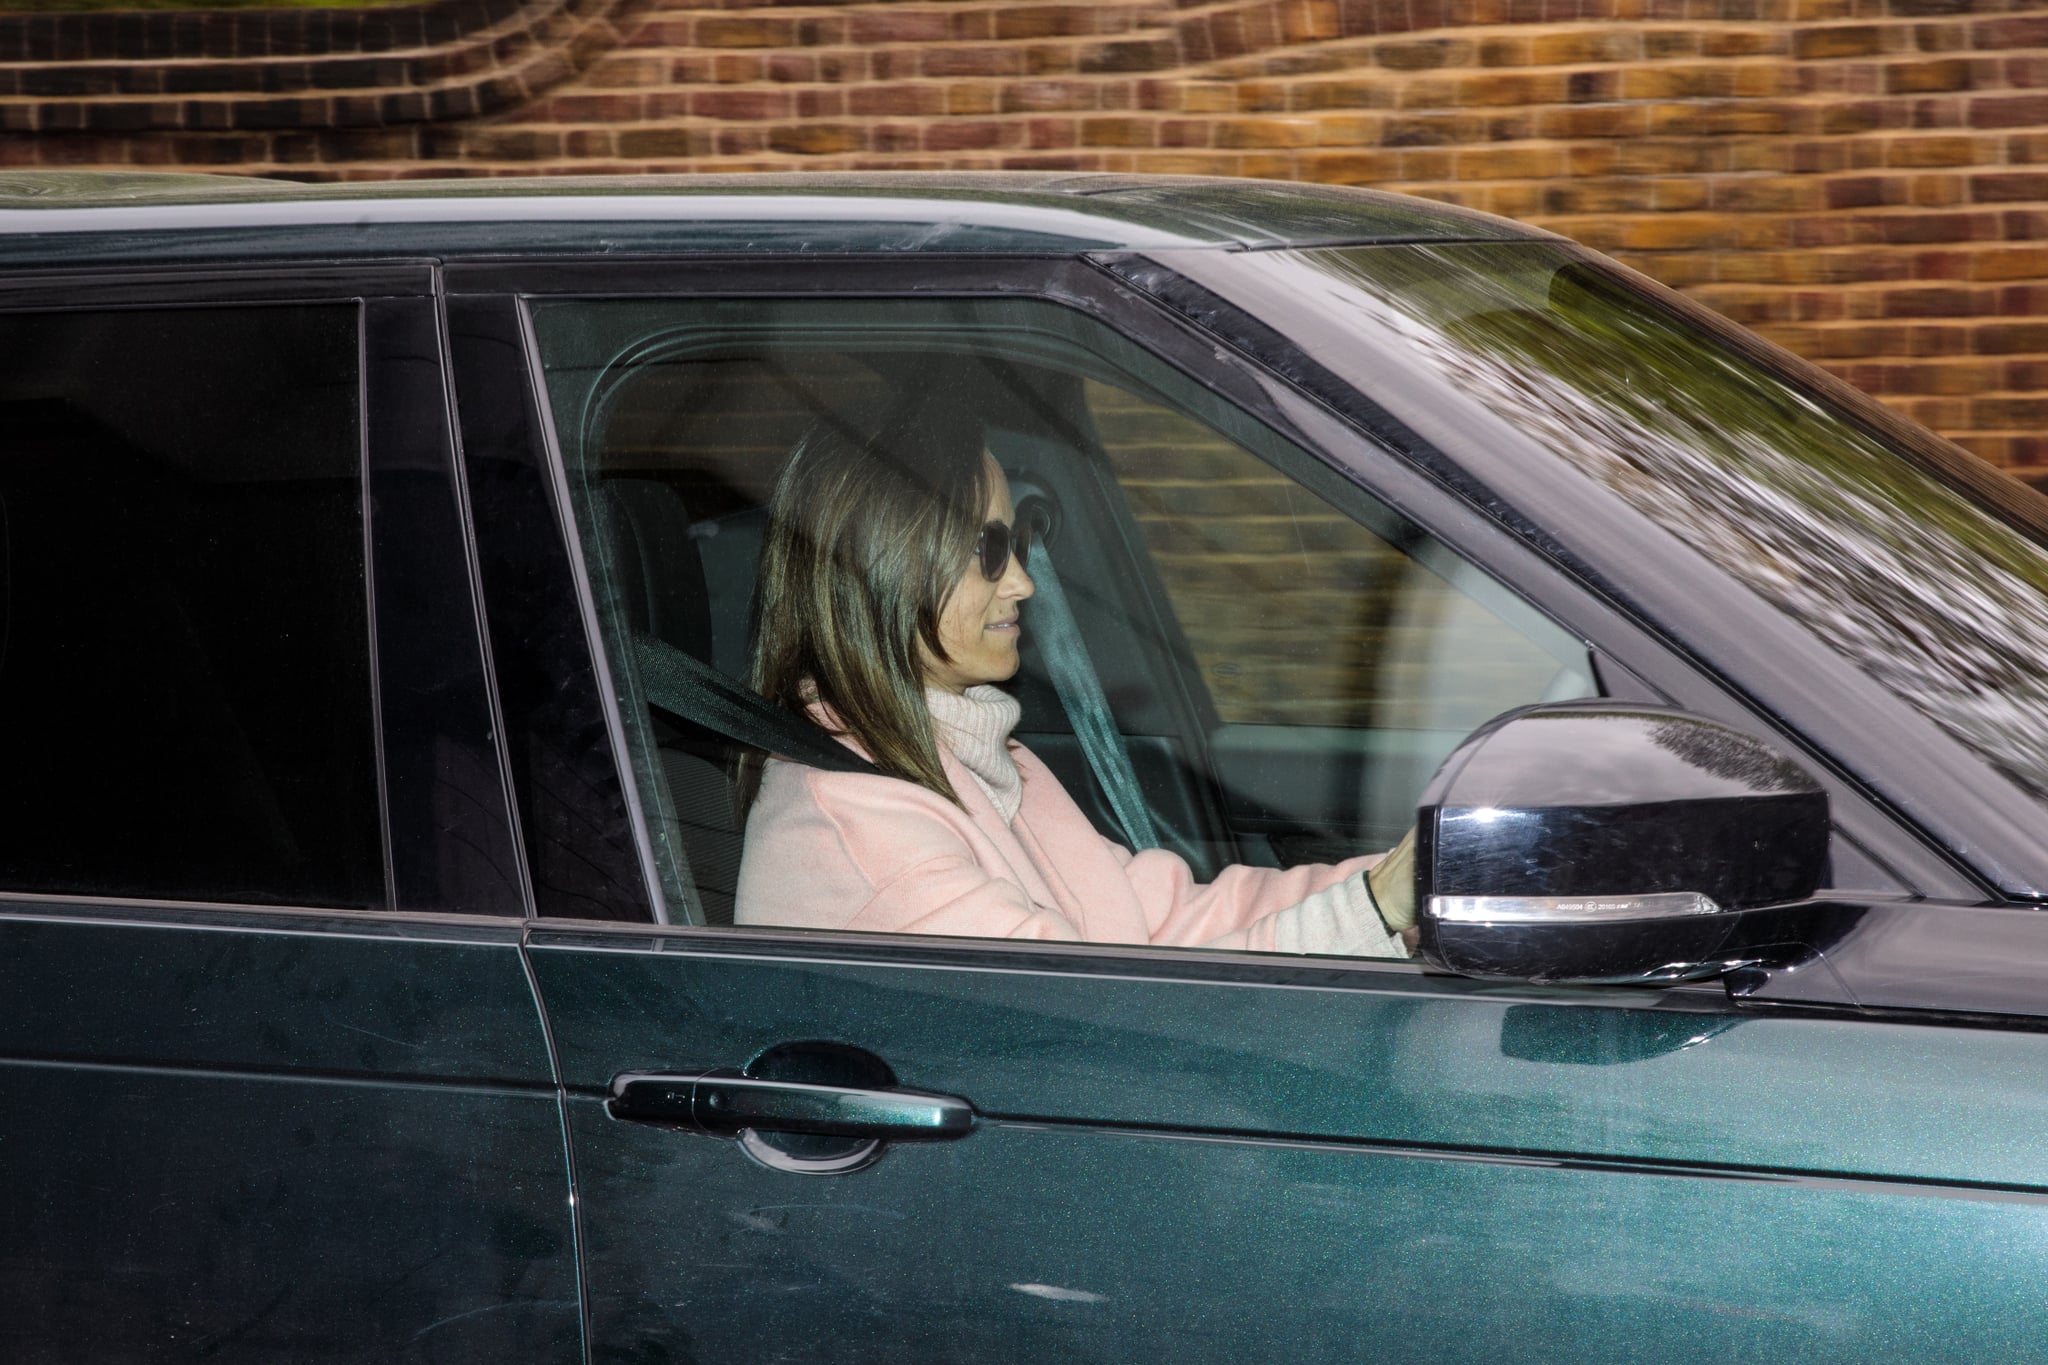 LONDON, ENGLAND - APRIL 24: Pippa Middleton, the sister of Catherine, Duchess of Cambridge leaves Kensington Palace by car on April 24, 2018 in London, England. The Duke and Duchess of Cambridge's third child, a boy weighing 8lbs 7oz, was born yesterday morning at 11:01. (Photo by Jack Taylor/Getty Images)